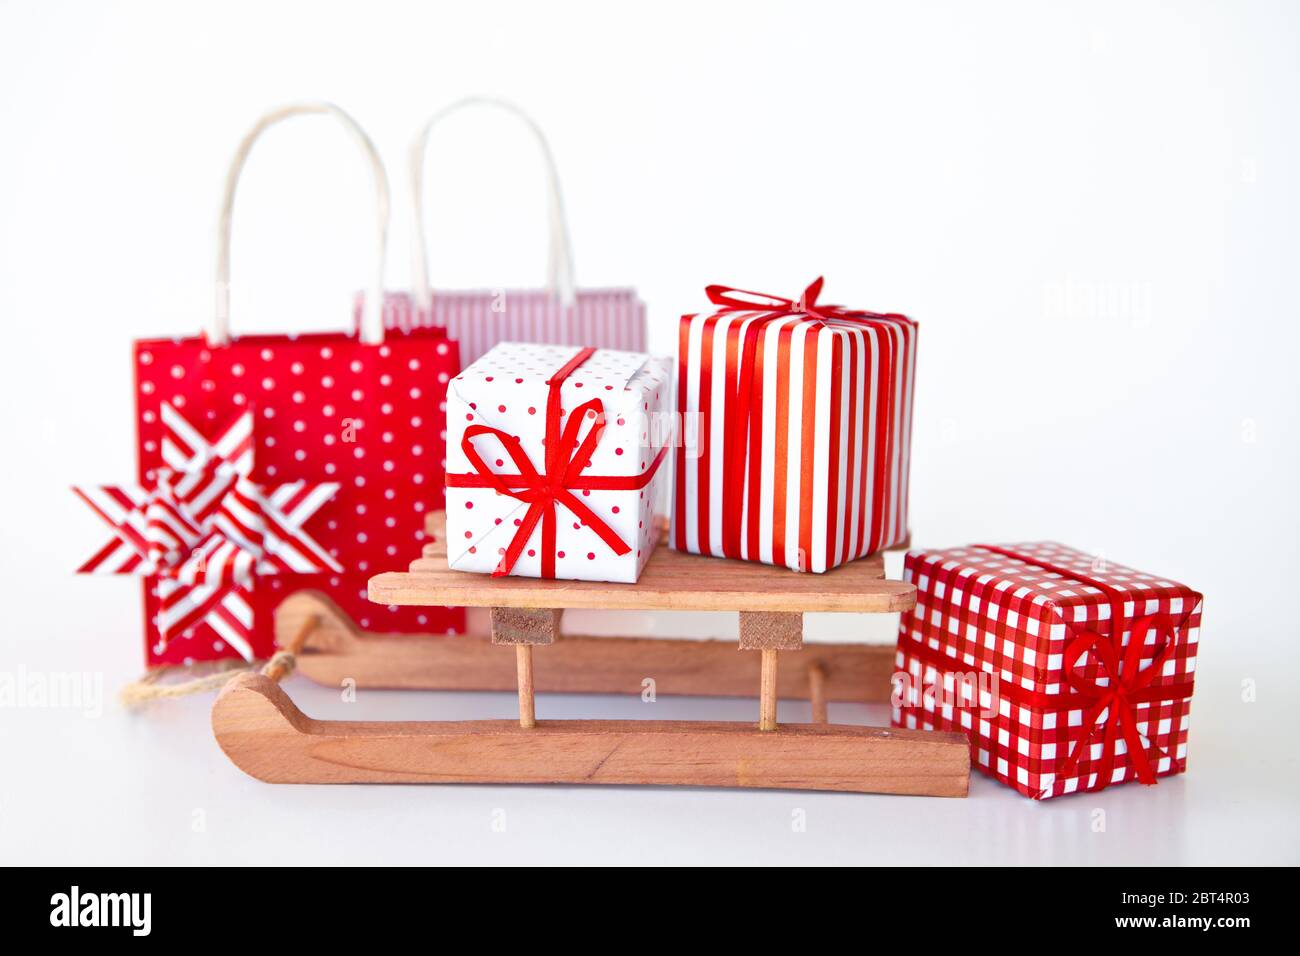 coloured, colourful, gorgeous, multifarious, richly coloured, gift, presents, Stock Photo